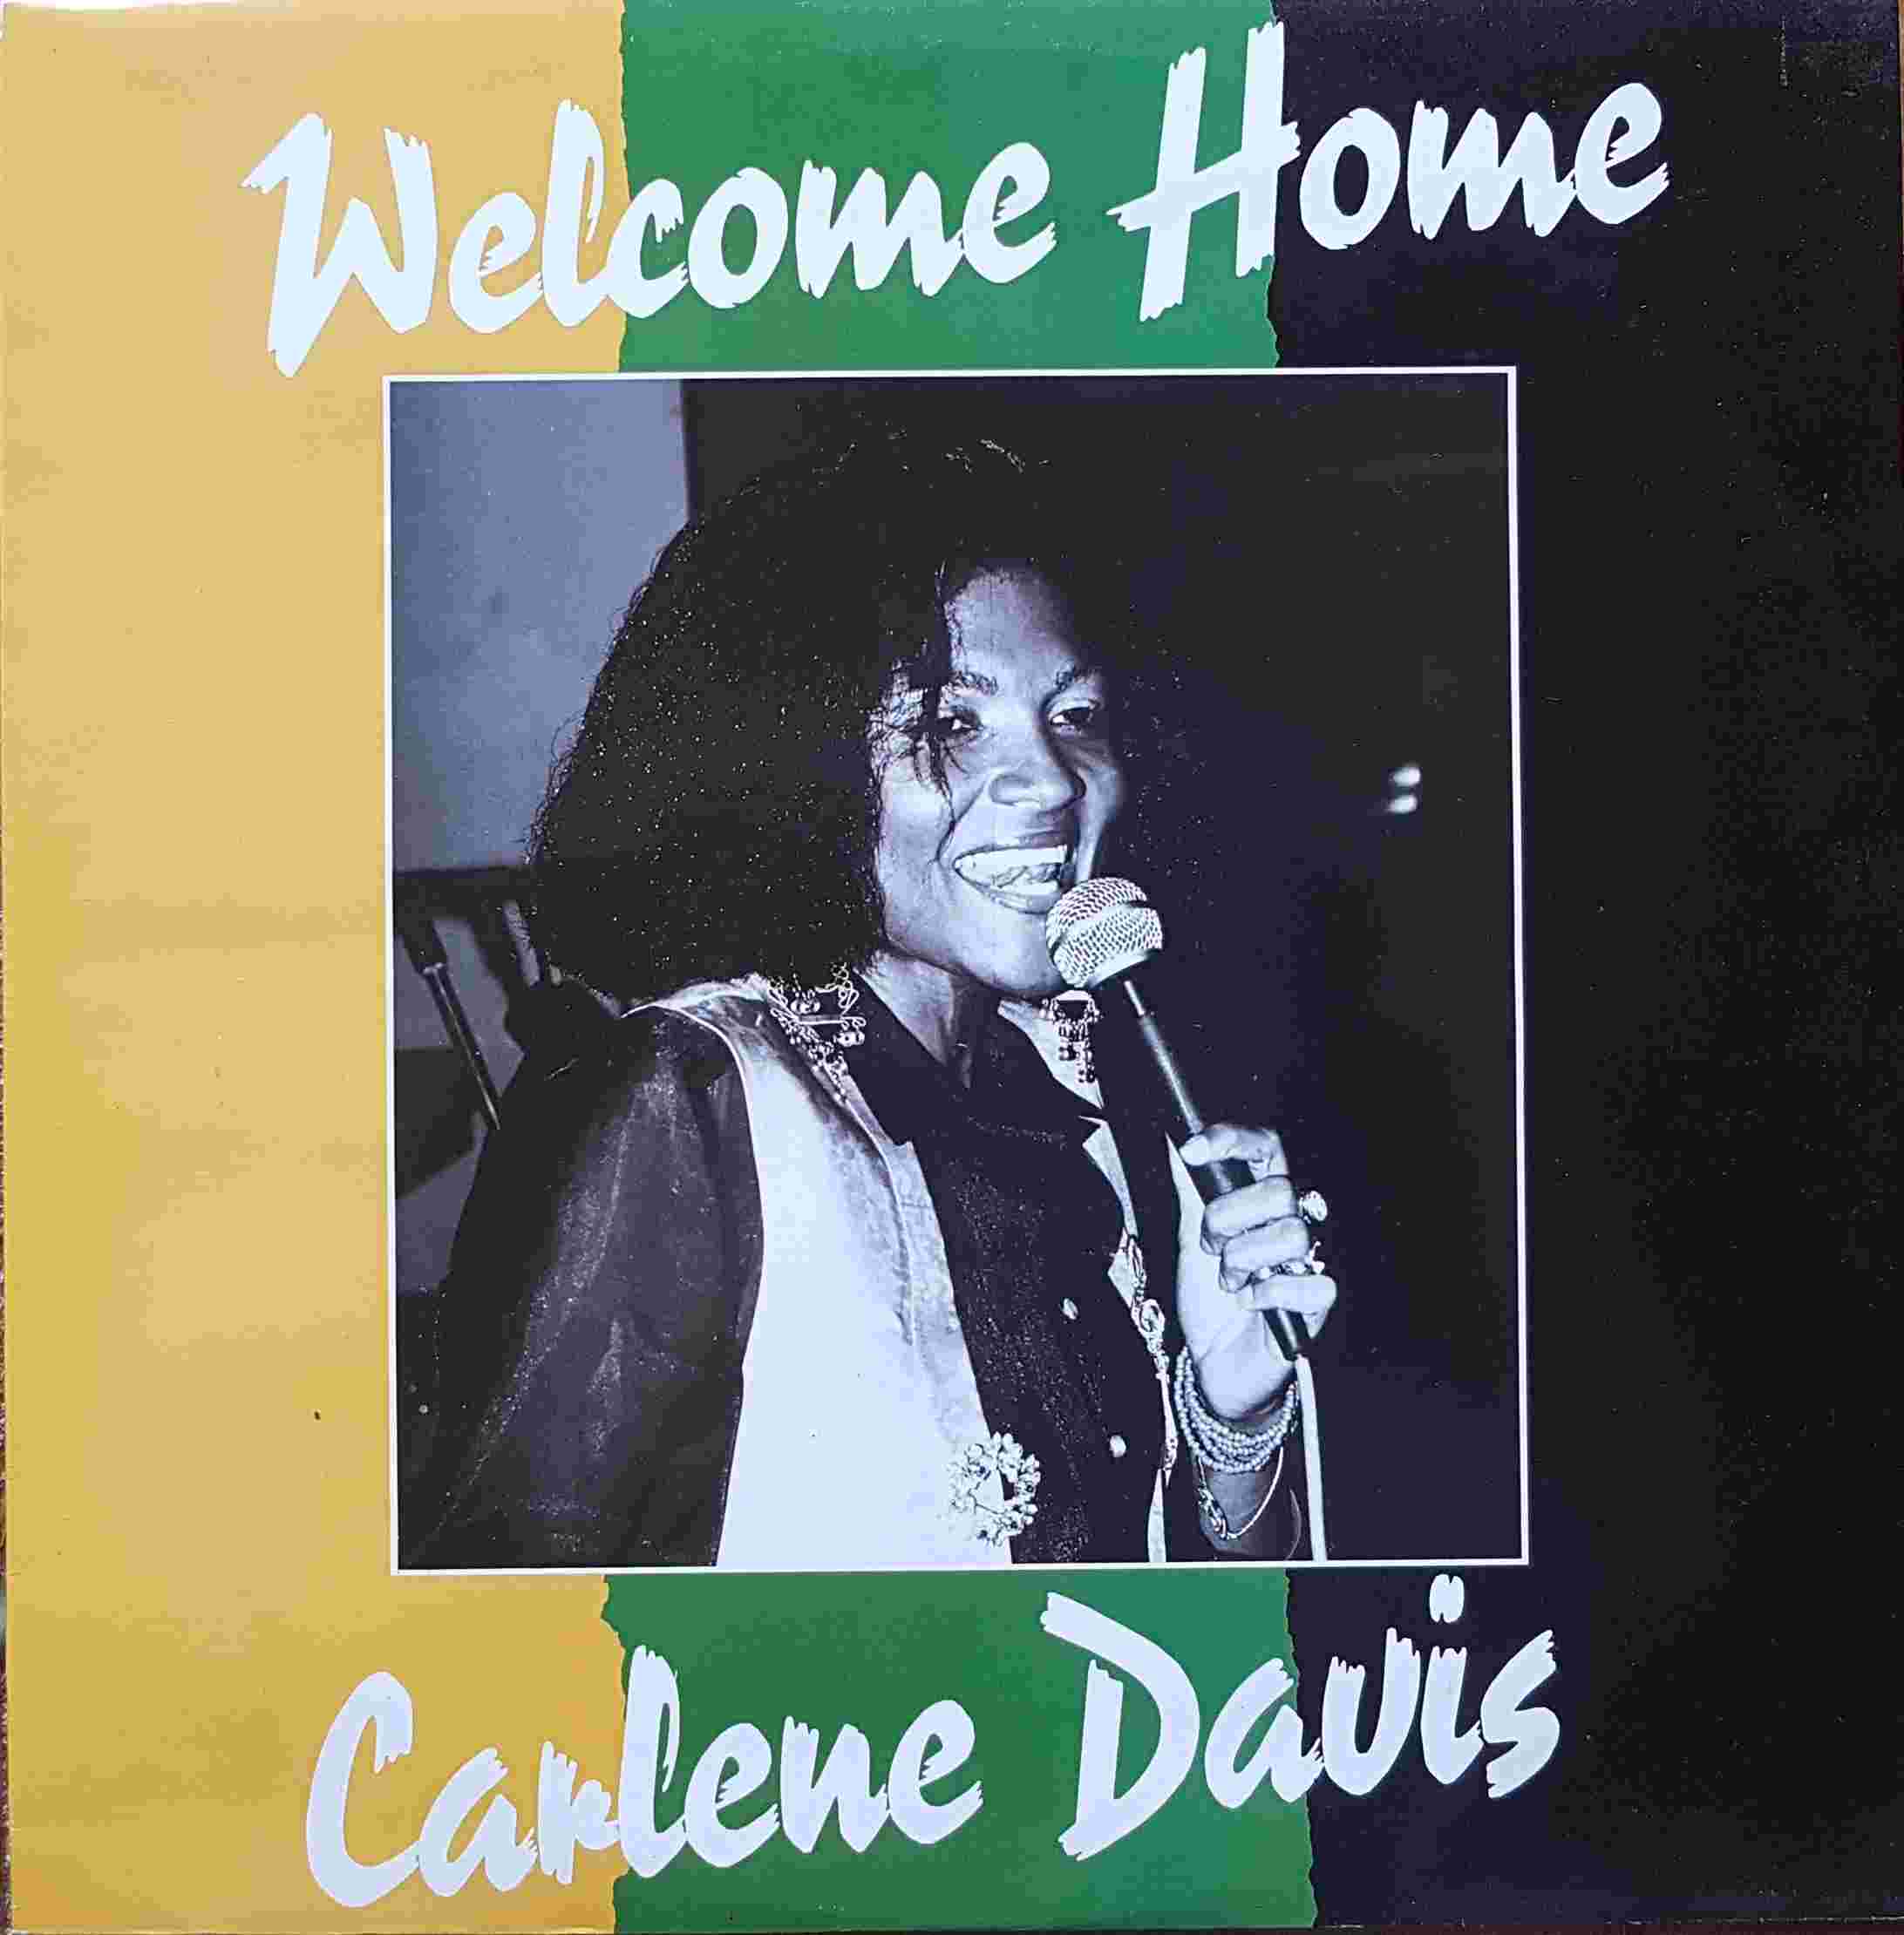 Picture of 12 RSL 244 Welcome home by artist Tommy Cowan / Carlene Davis from the BBC 12inches - Records and Tapes library